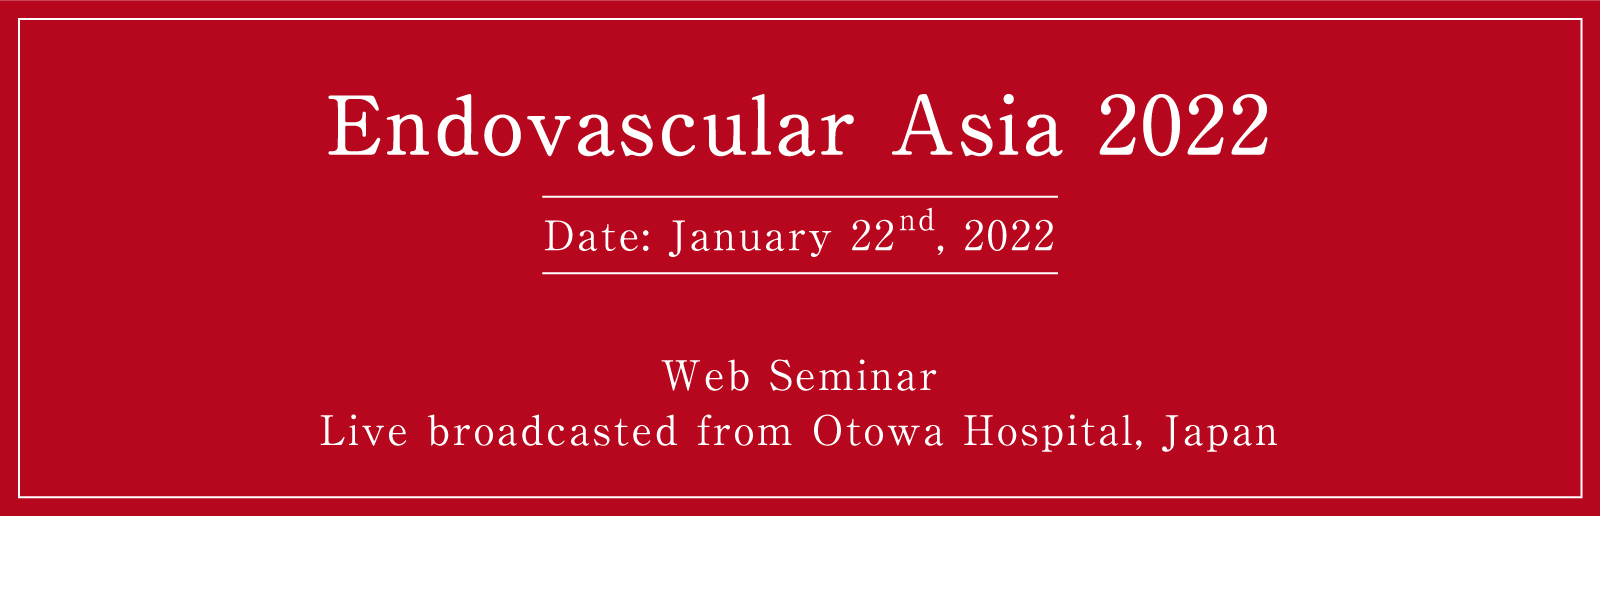 Endovascular Asia 2022 Date: January 22nd, 2022 Web Seminar Live broadcasted from Otowa Hospital, Japan